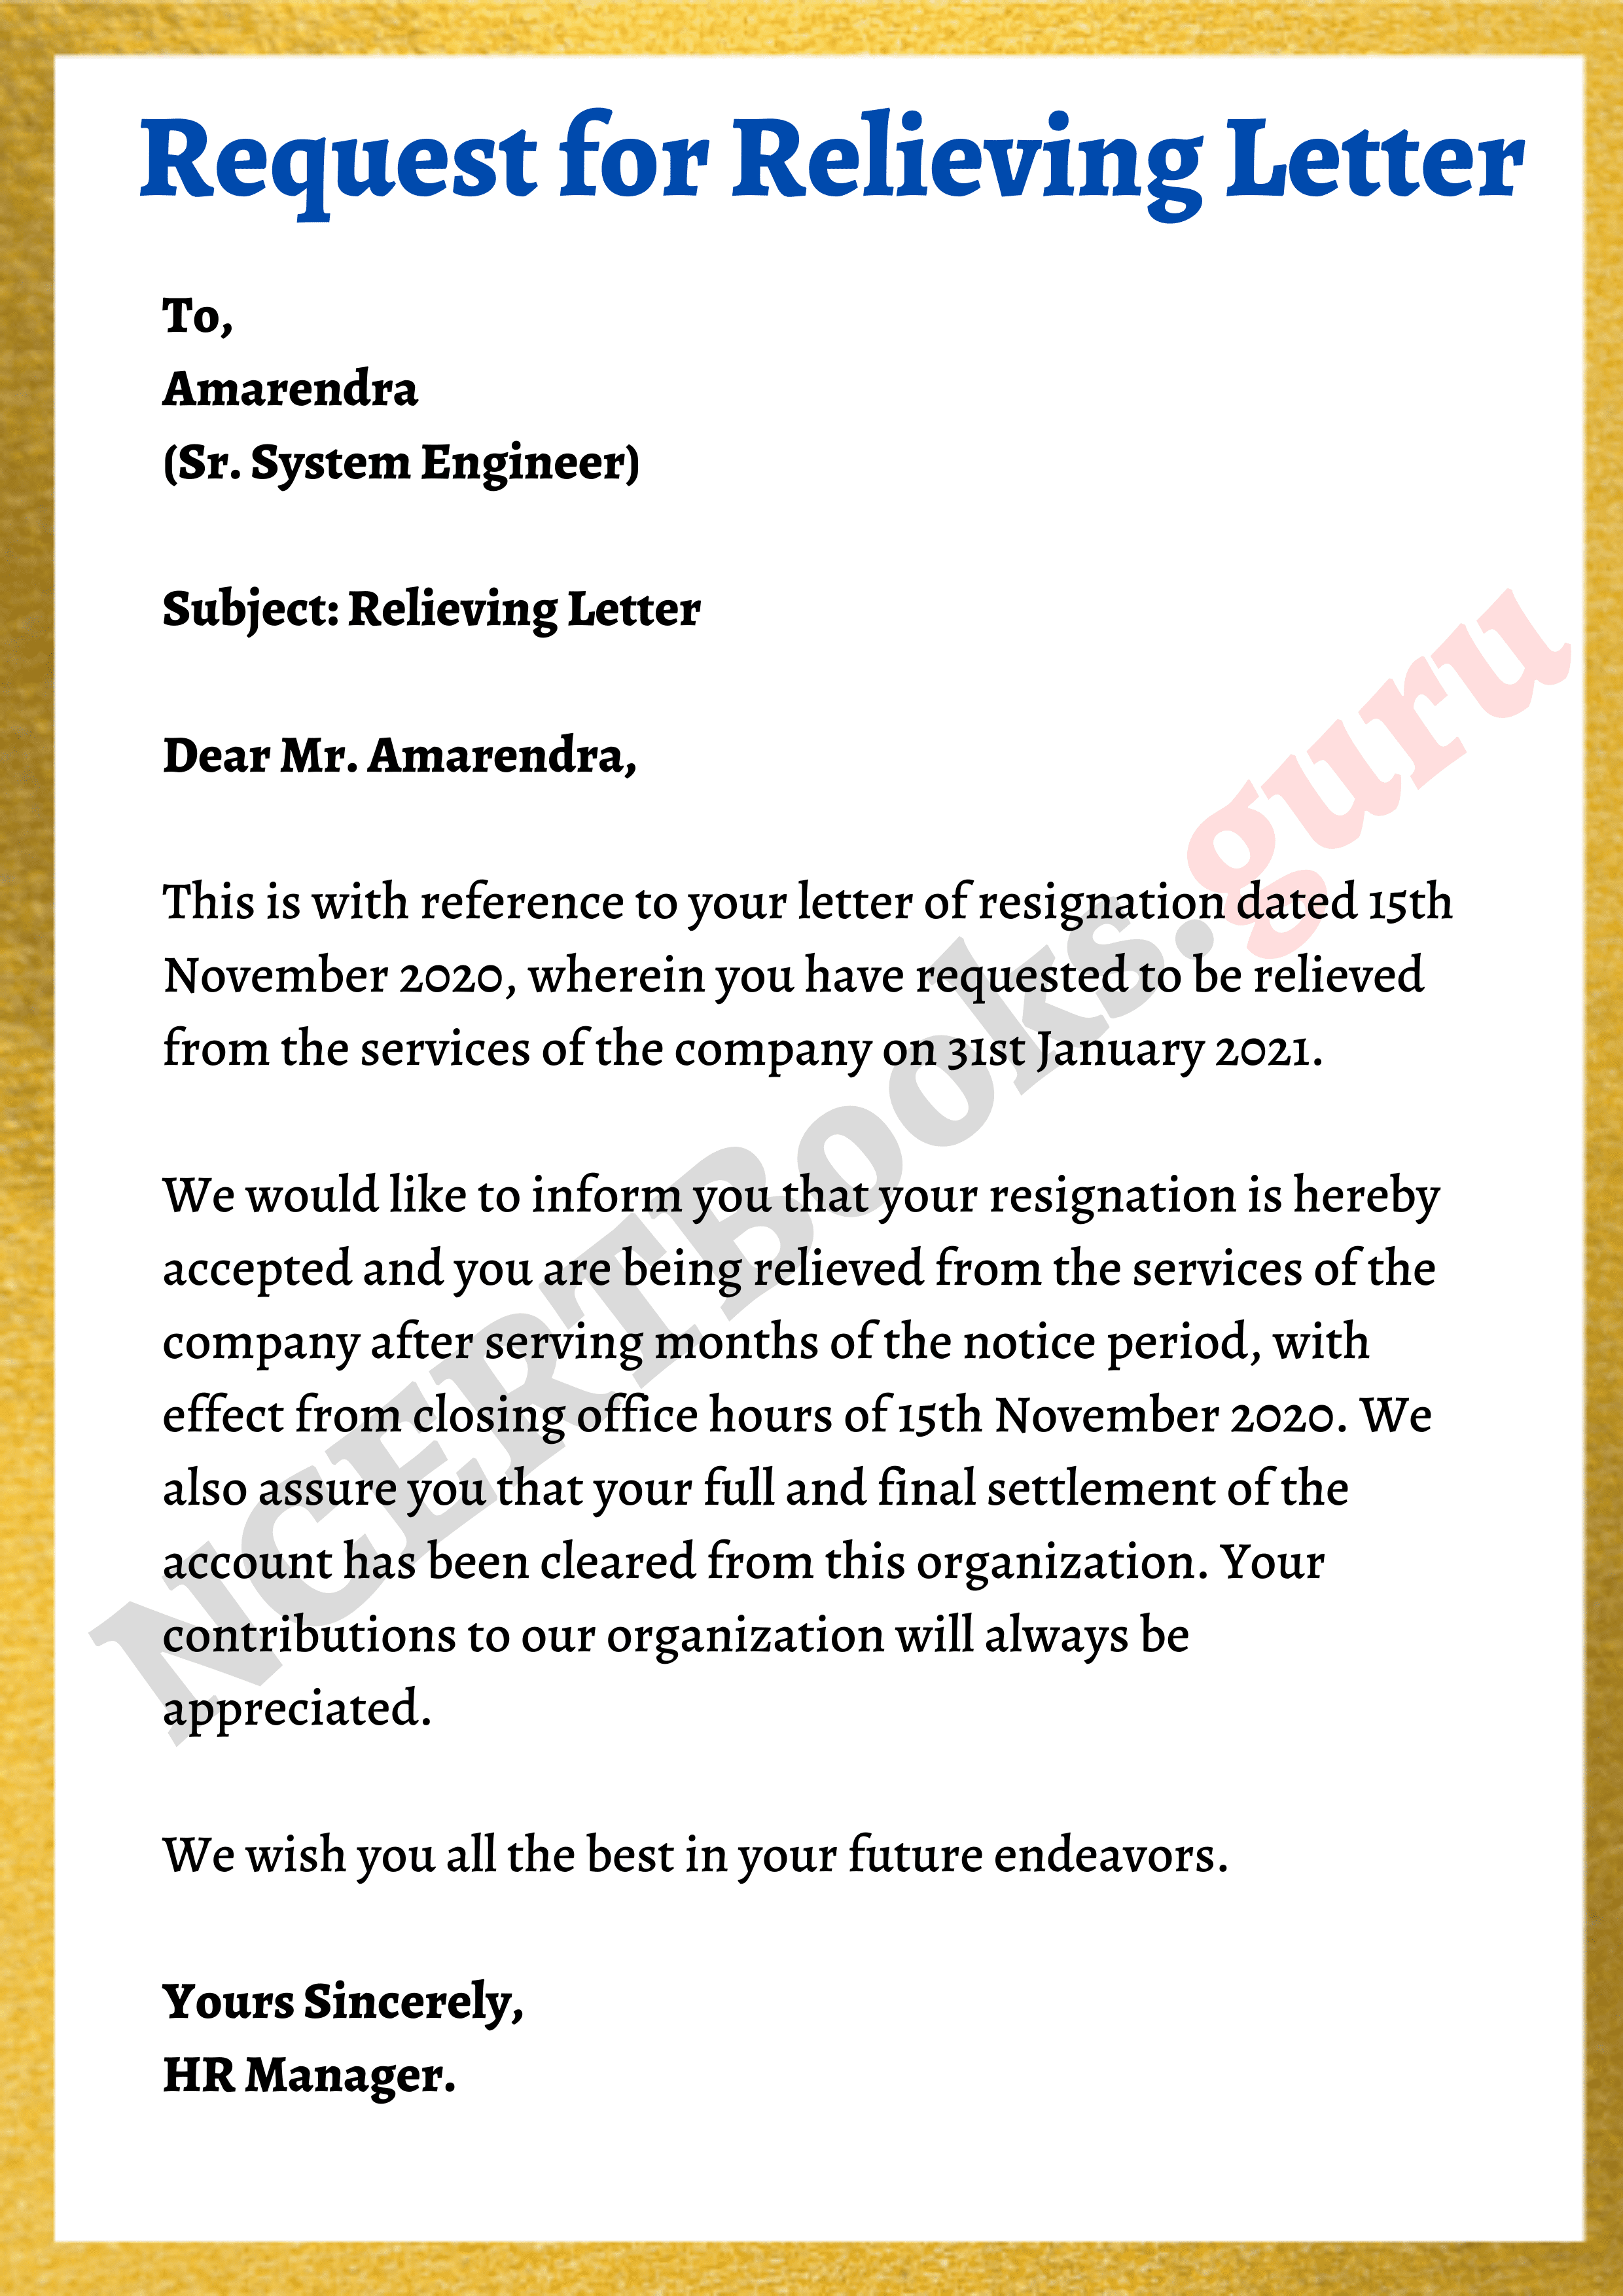 Request for Relieving Letter